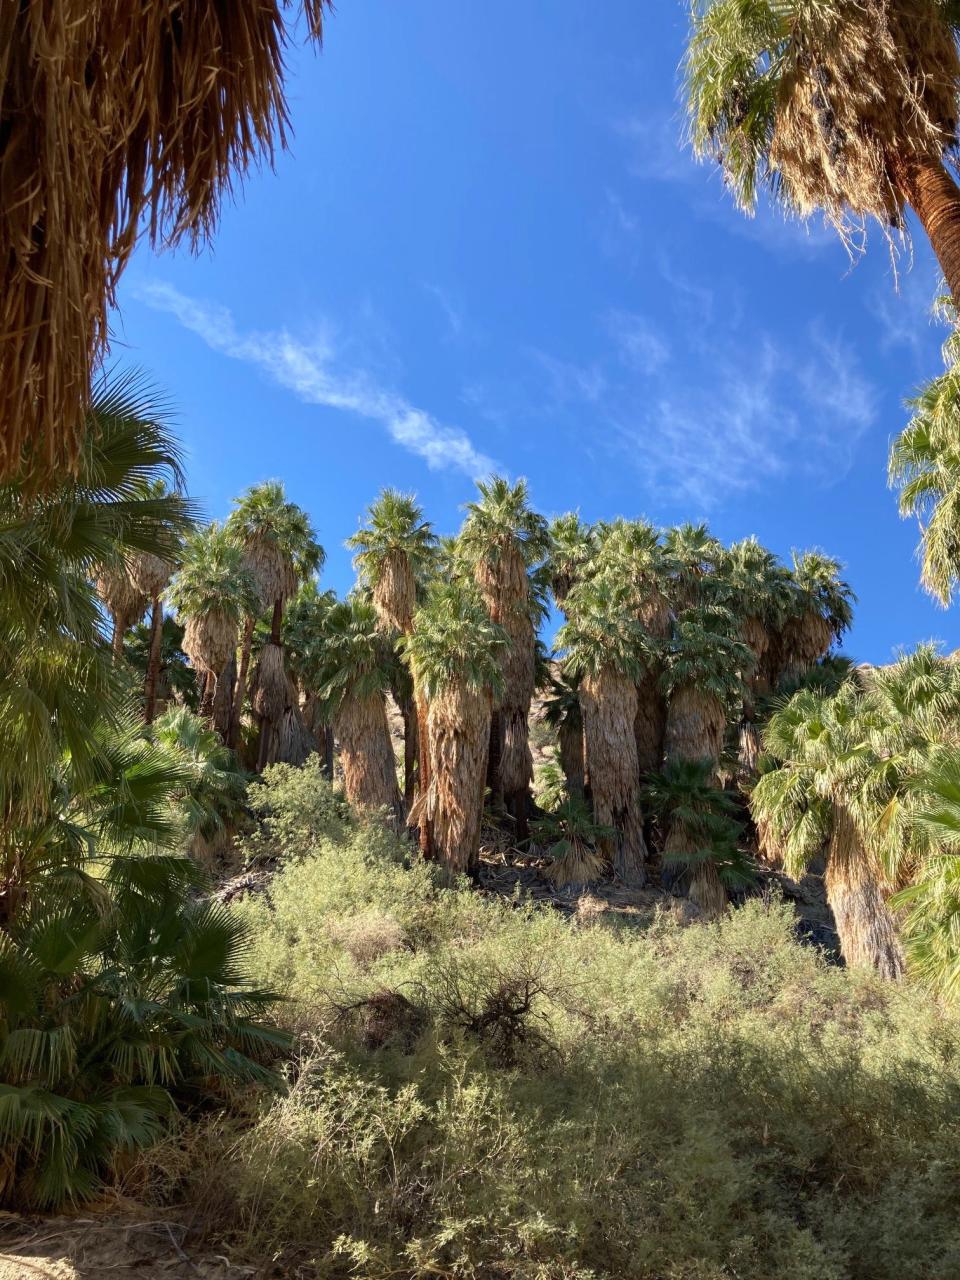 Palm Canyon offers a pleasant, cool respite from the Sonoran Desert.